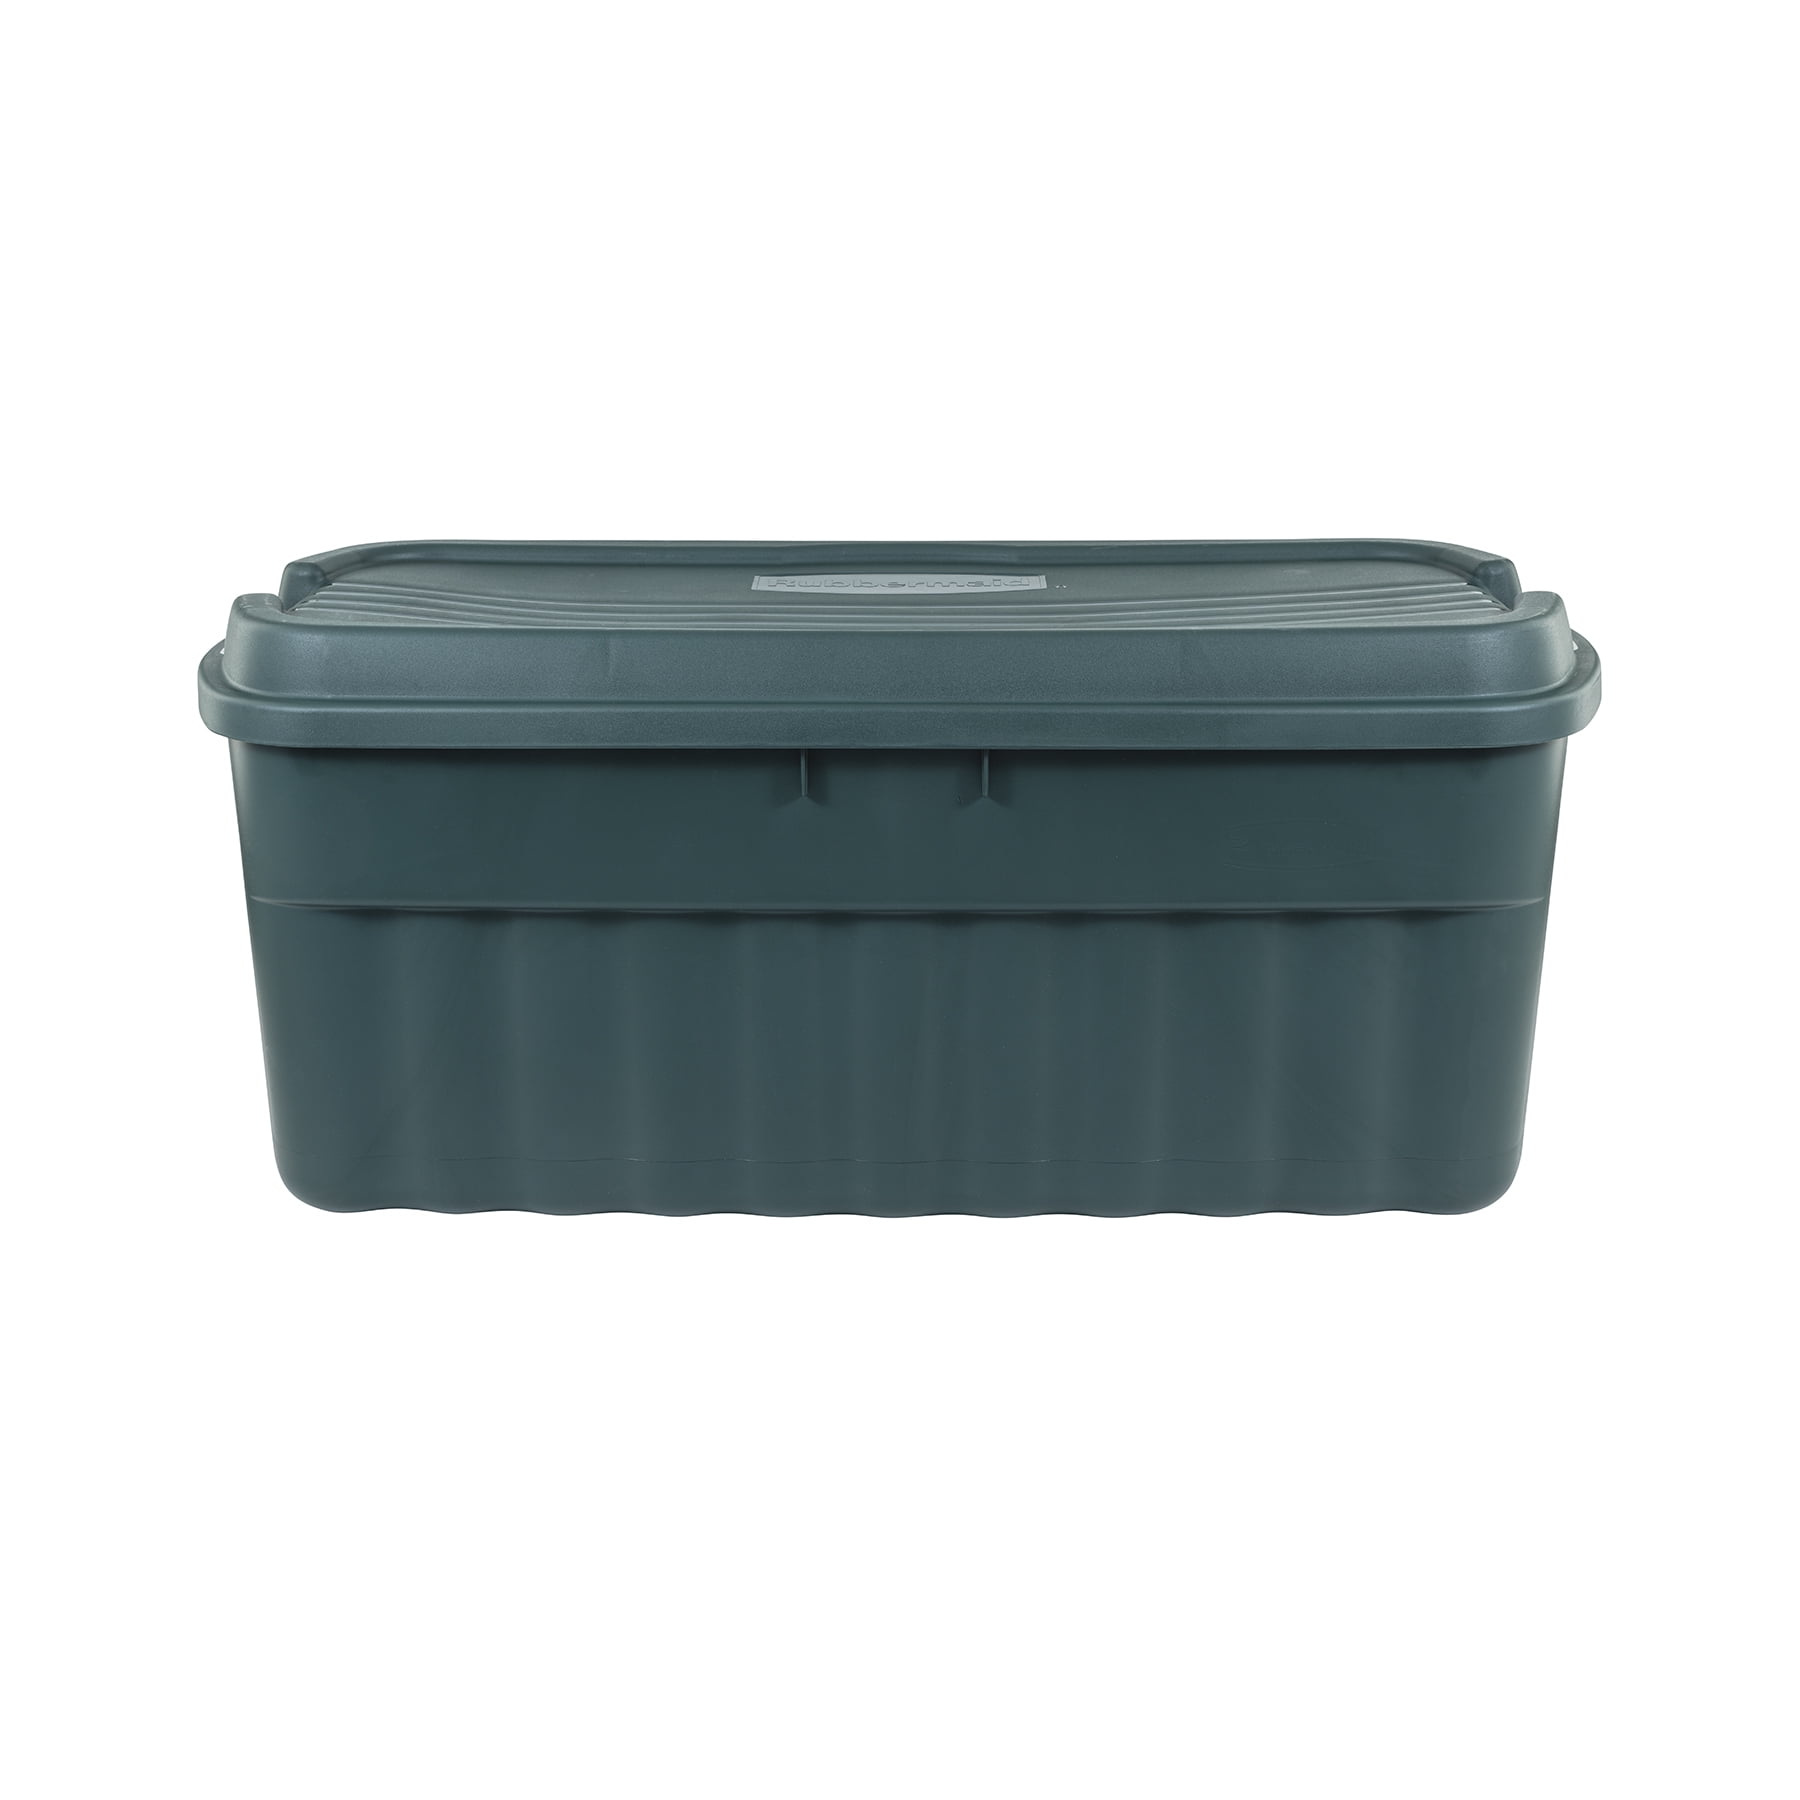 Rubbermaid ECOSense Storage Containers with Lids, Durable and Reusable  Stackable Storage Bins for Garage or Home Organization, Made From Recycled